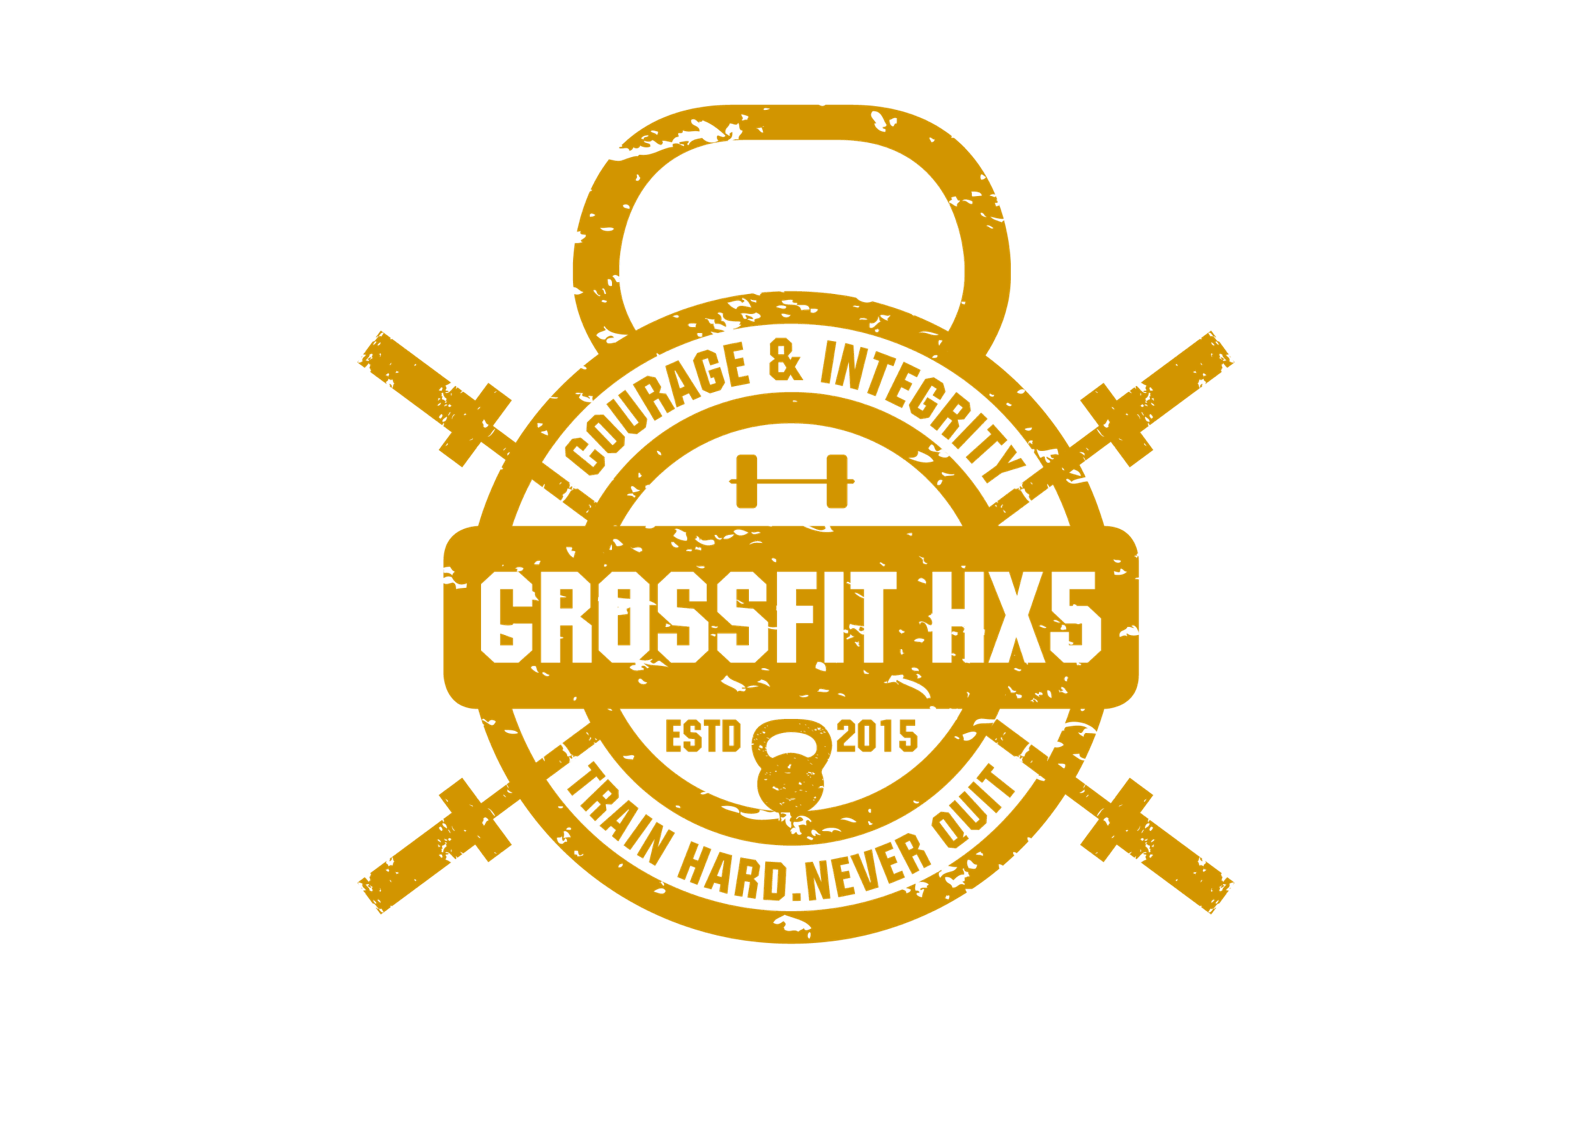 CrossFit HX5 logo | CrossFit Huddersfield, Halifax and Brighouse